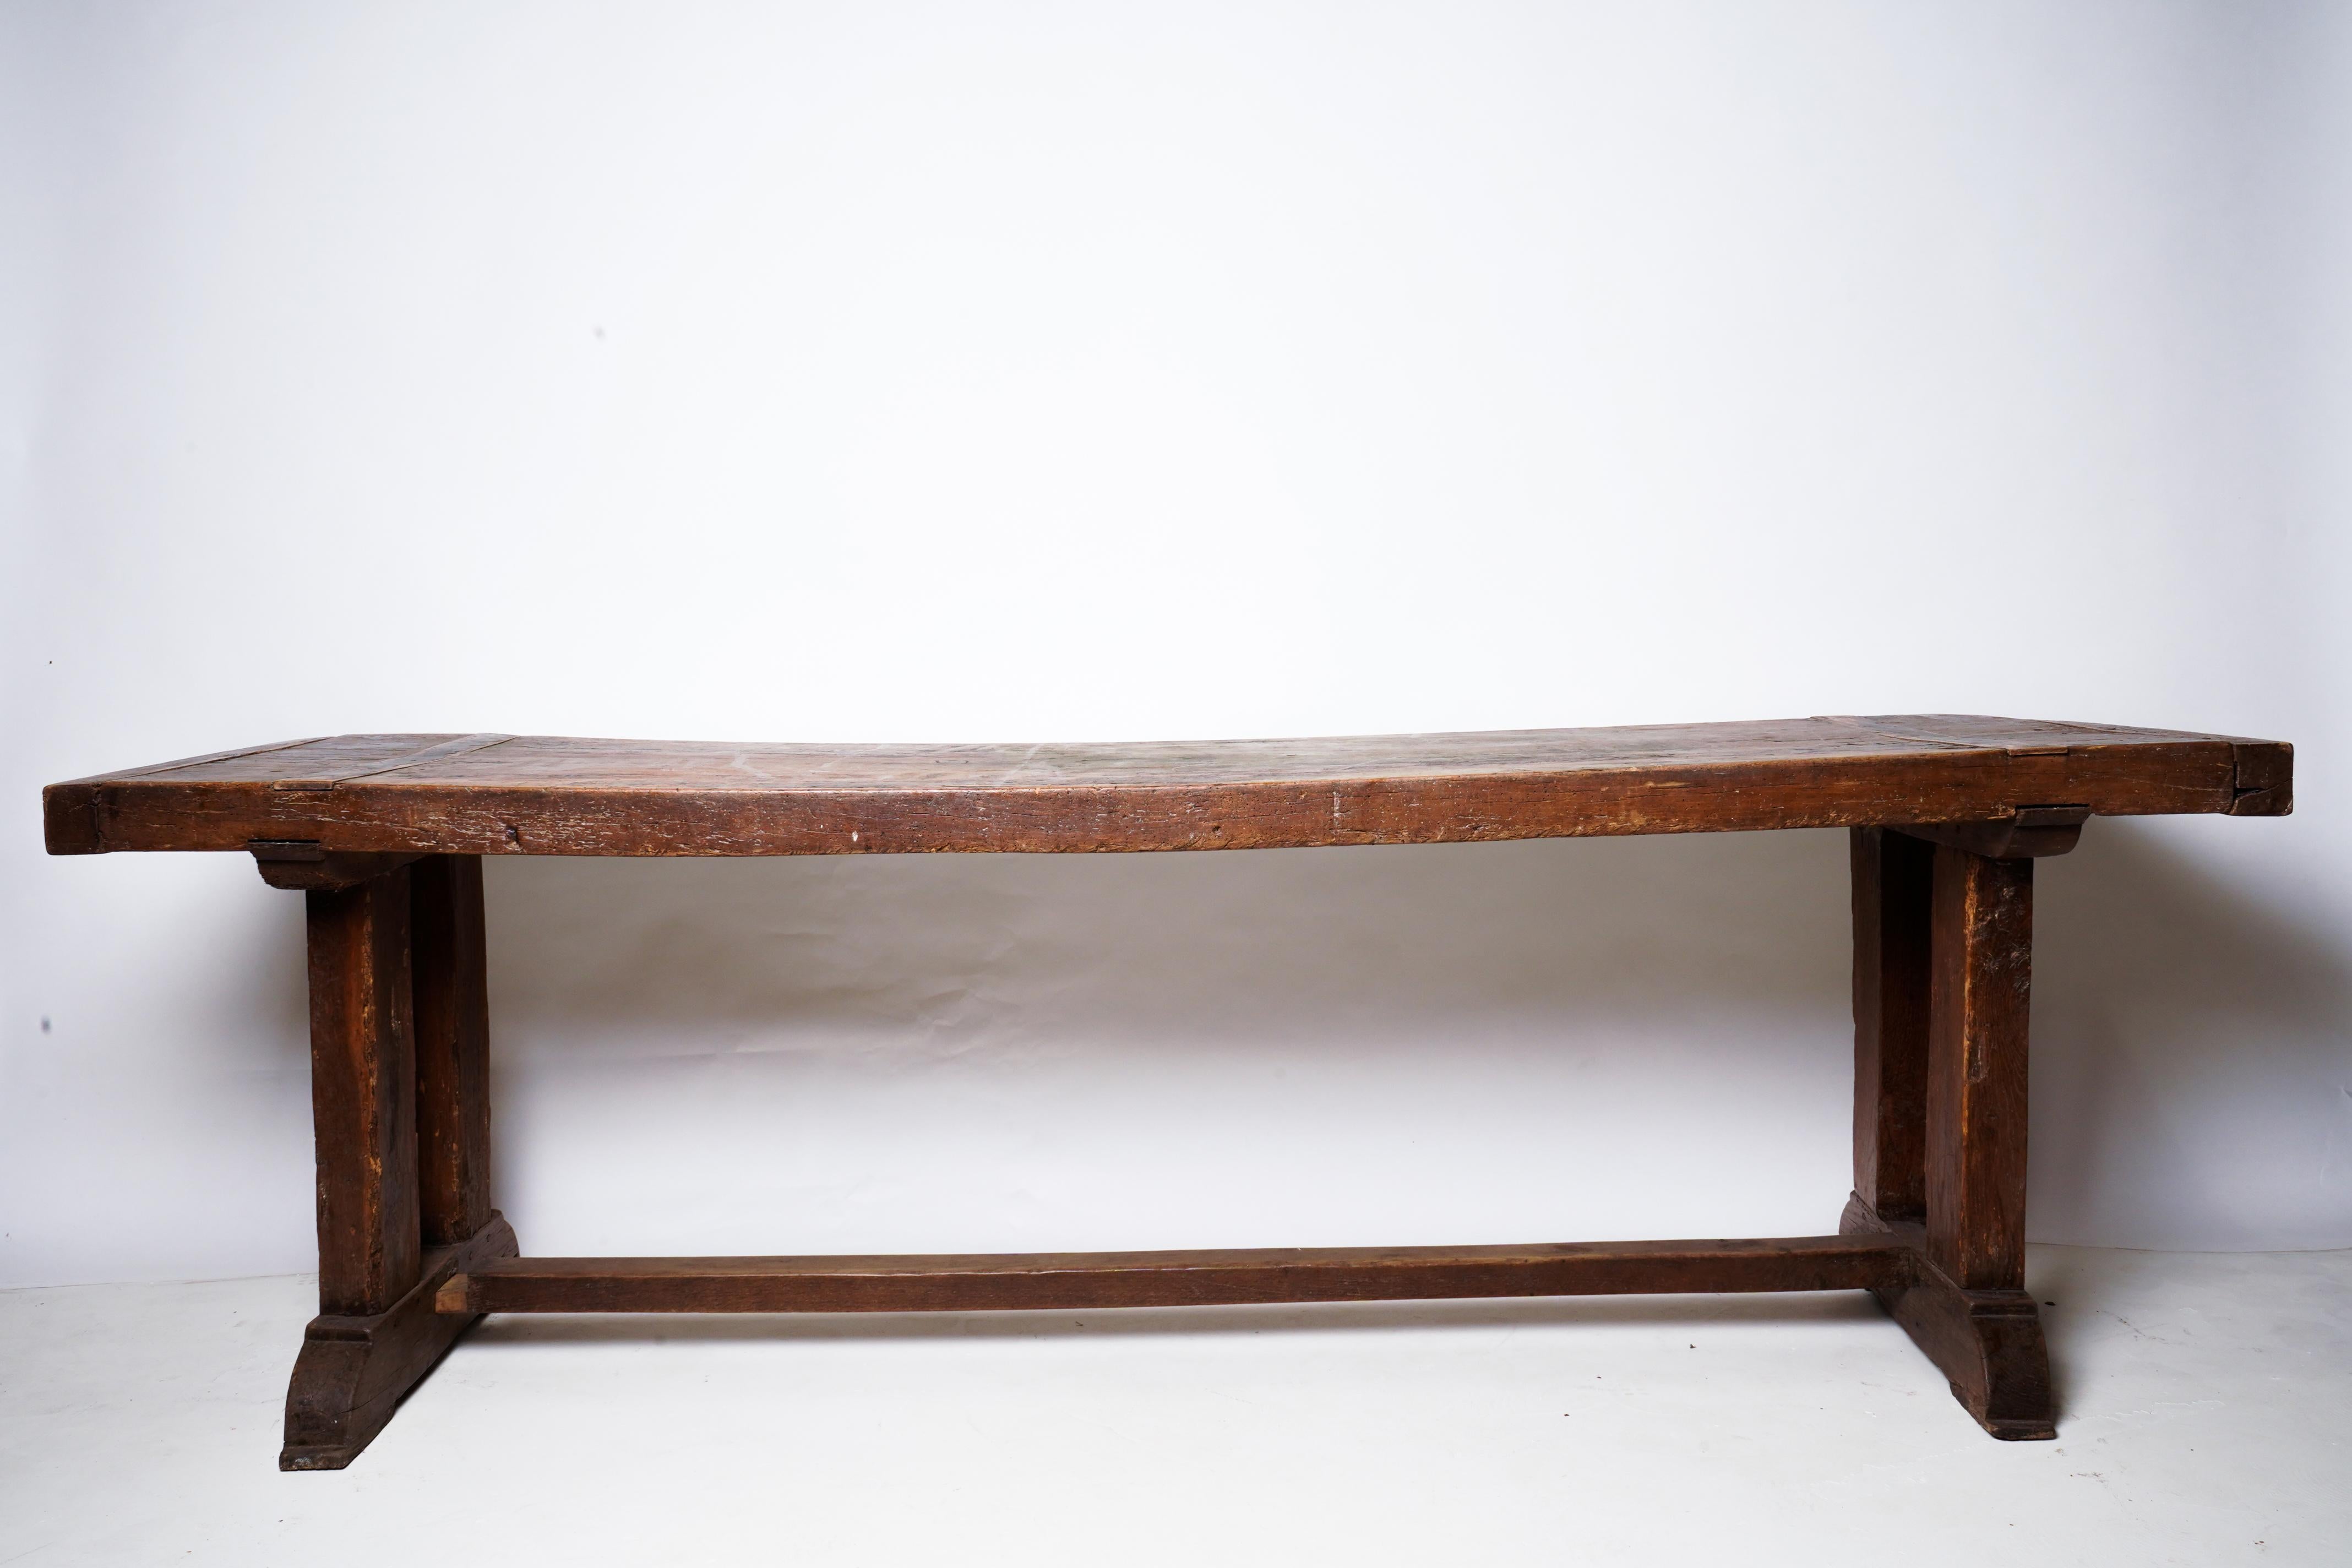 This extremely old table is made from a solid Walnut slab and retains its original trestle base. It's a very heavy and time-worn piece of wood with rich patina and a mysterious sag in its center. It can be refinished according to the customer's